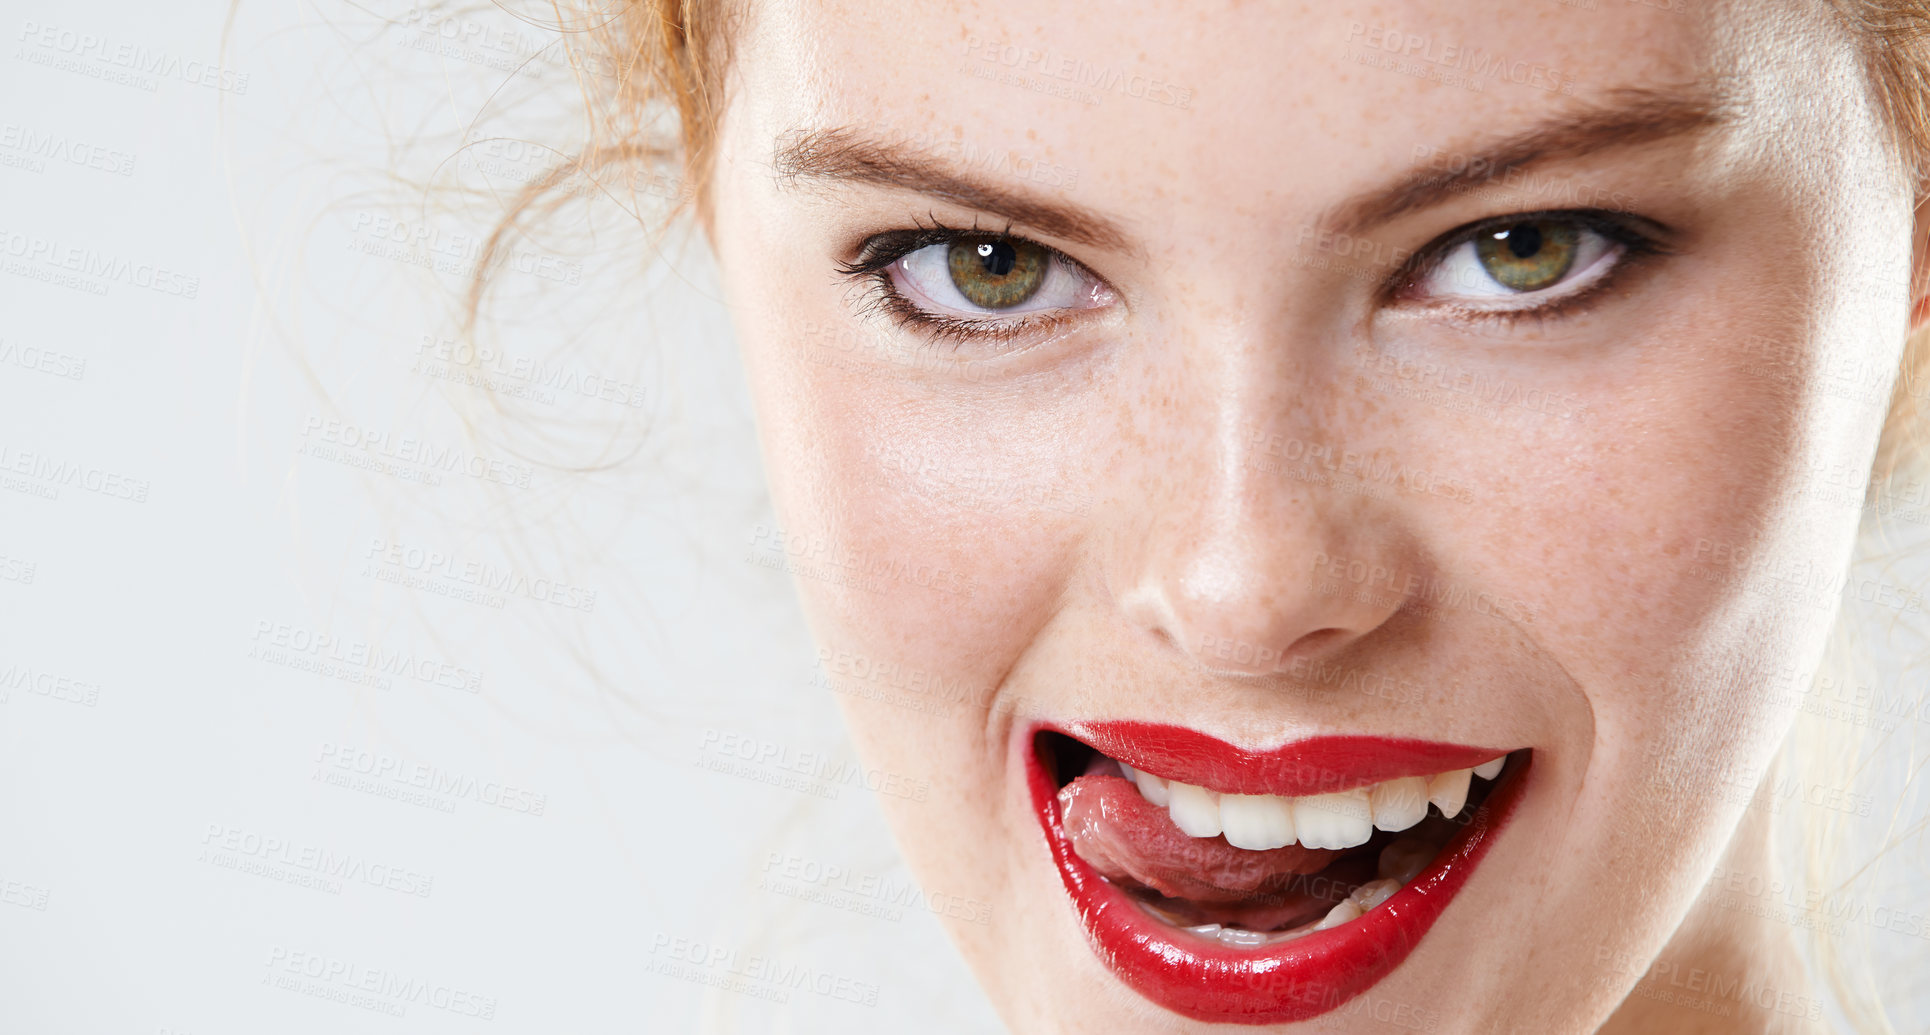 Buy stock photo Portrait of a beautiful woman wearing makeup isolated against a grey background in studio. A sexy redhead wearing red lipstick and biting her tongue. Face of a flirty woman licking her lips